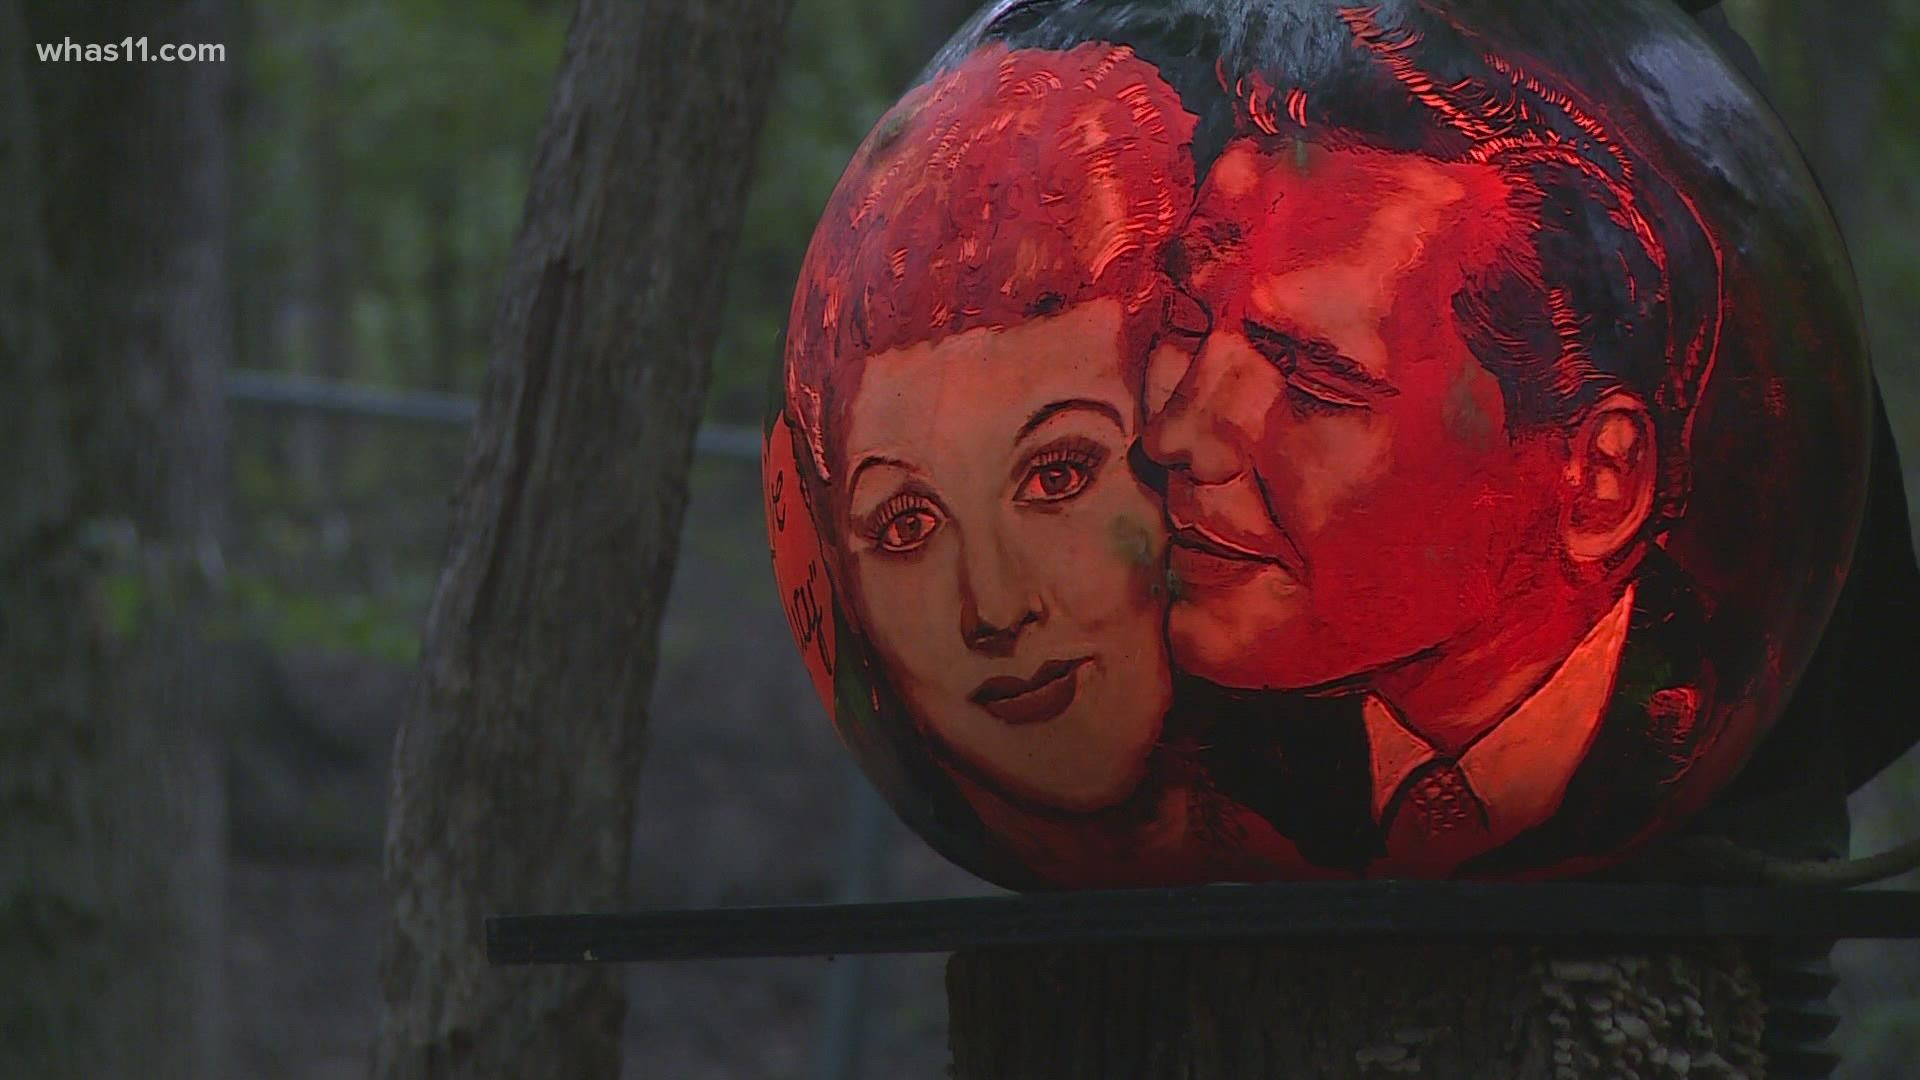 The annual pumpkin celebration in Iroquois Park kicked off its first night with a tribute to old-school television shows.